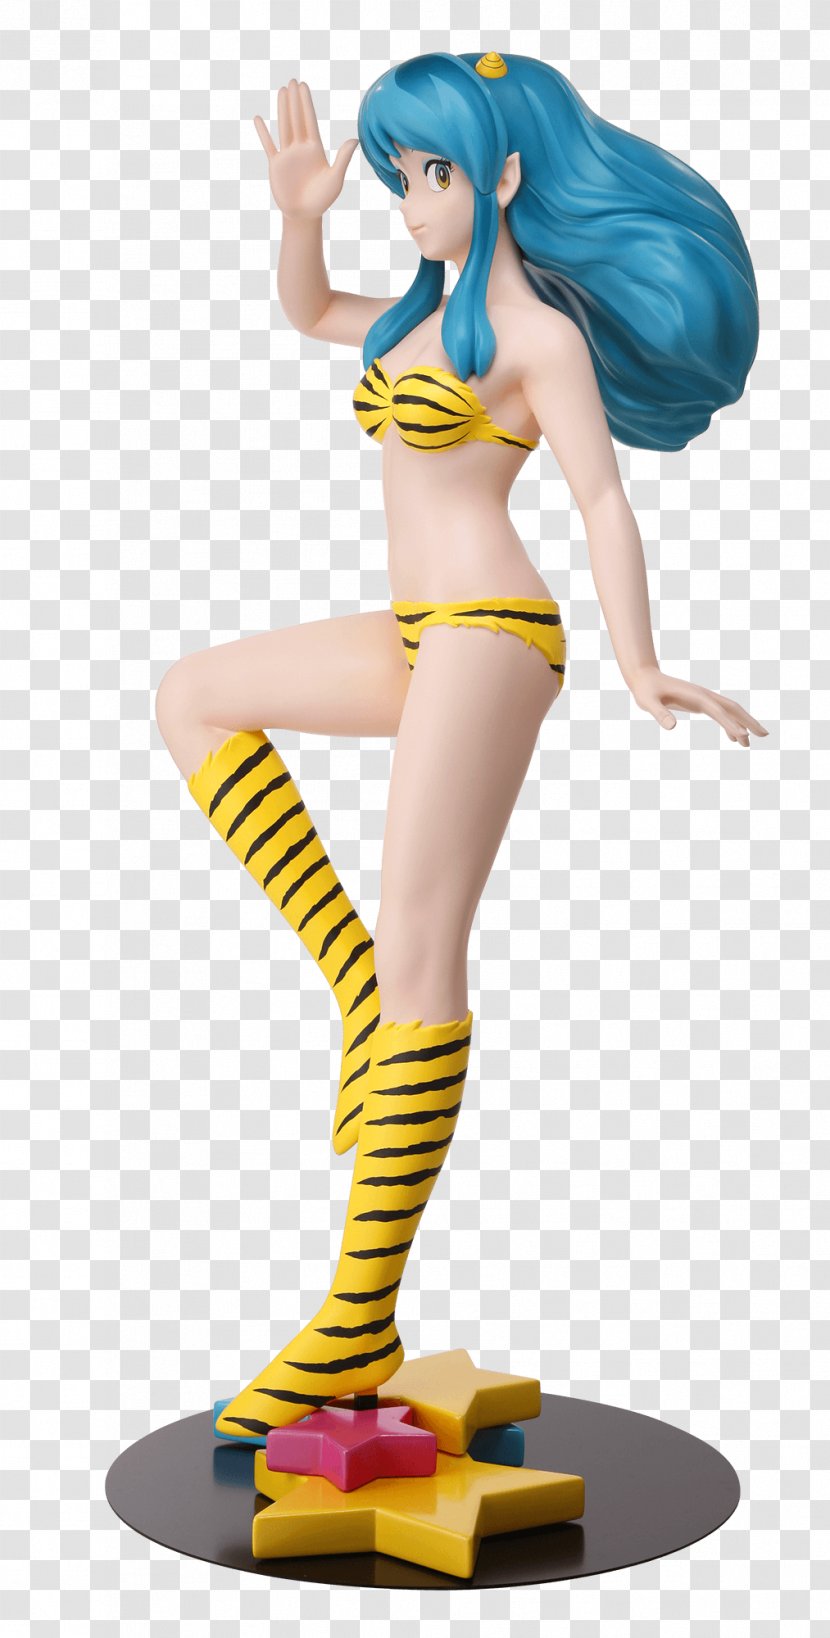 Lum Invader Figurine Statue Model Figure Cosplay - Watercolor - Silhouette Transparent PNG